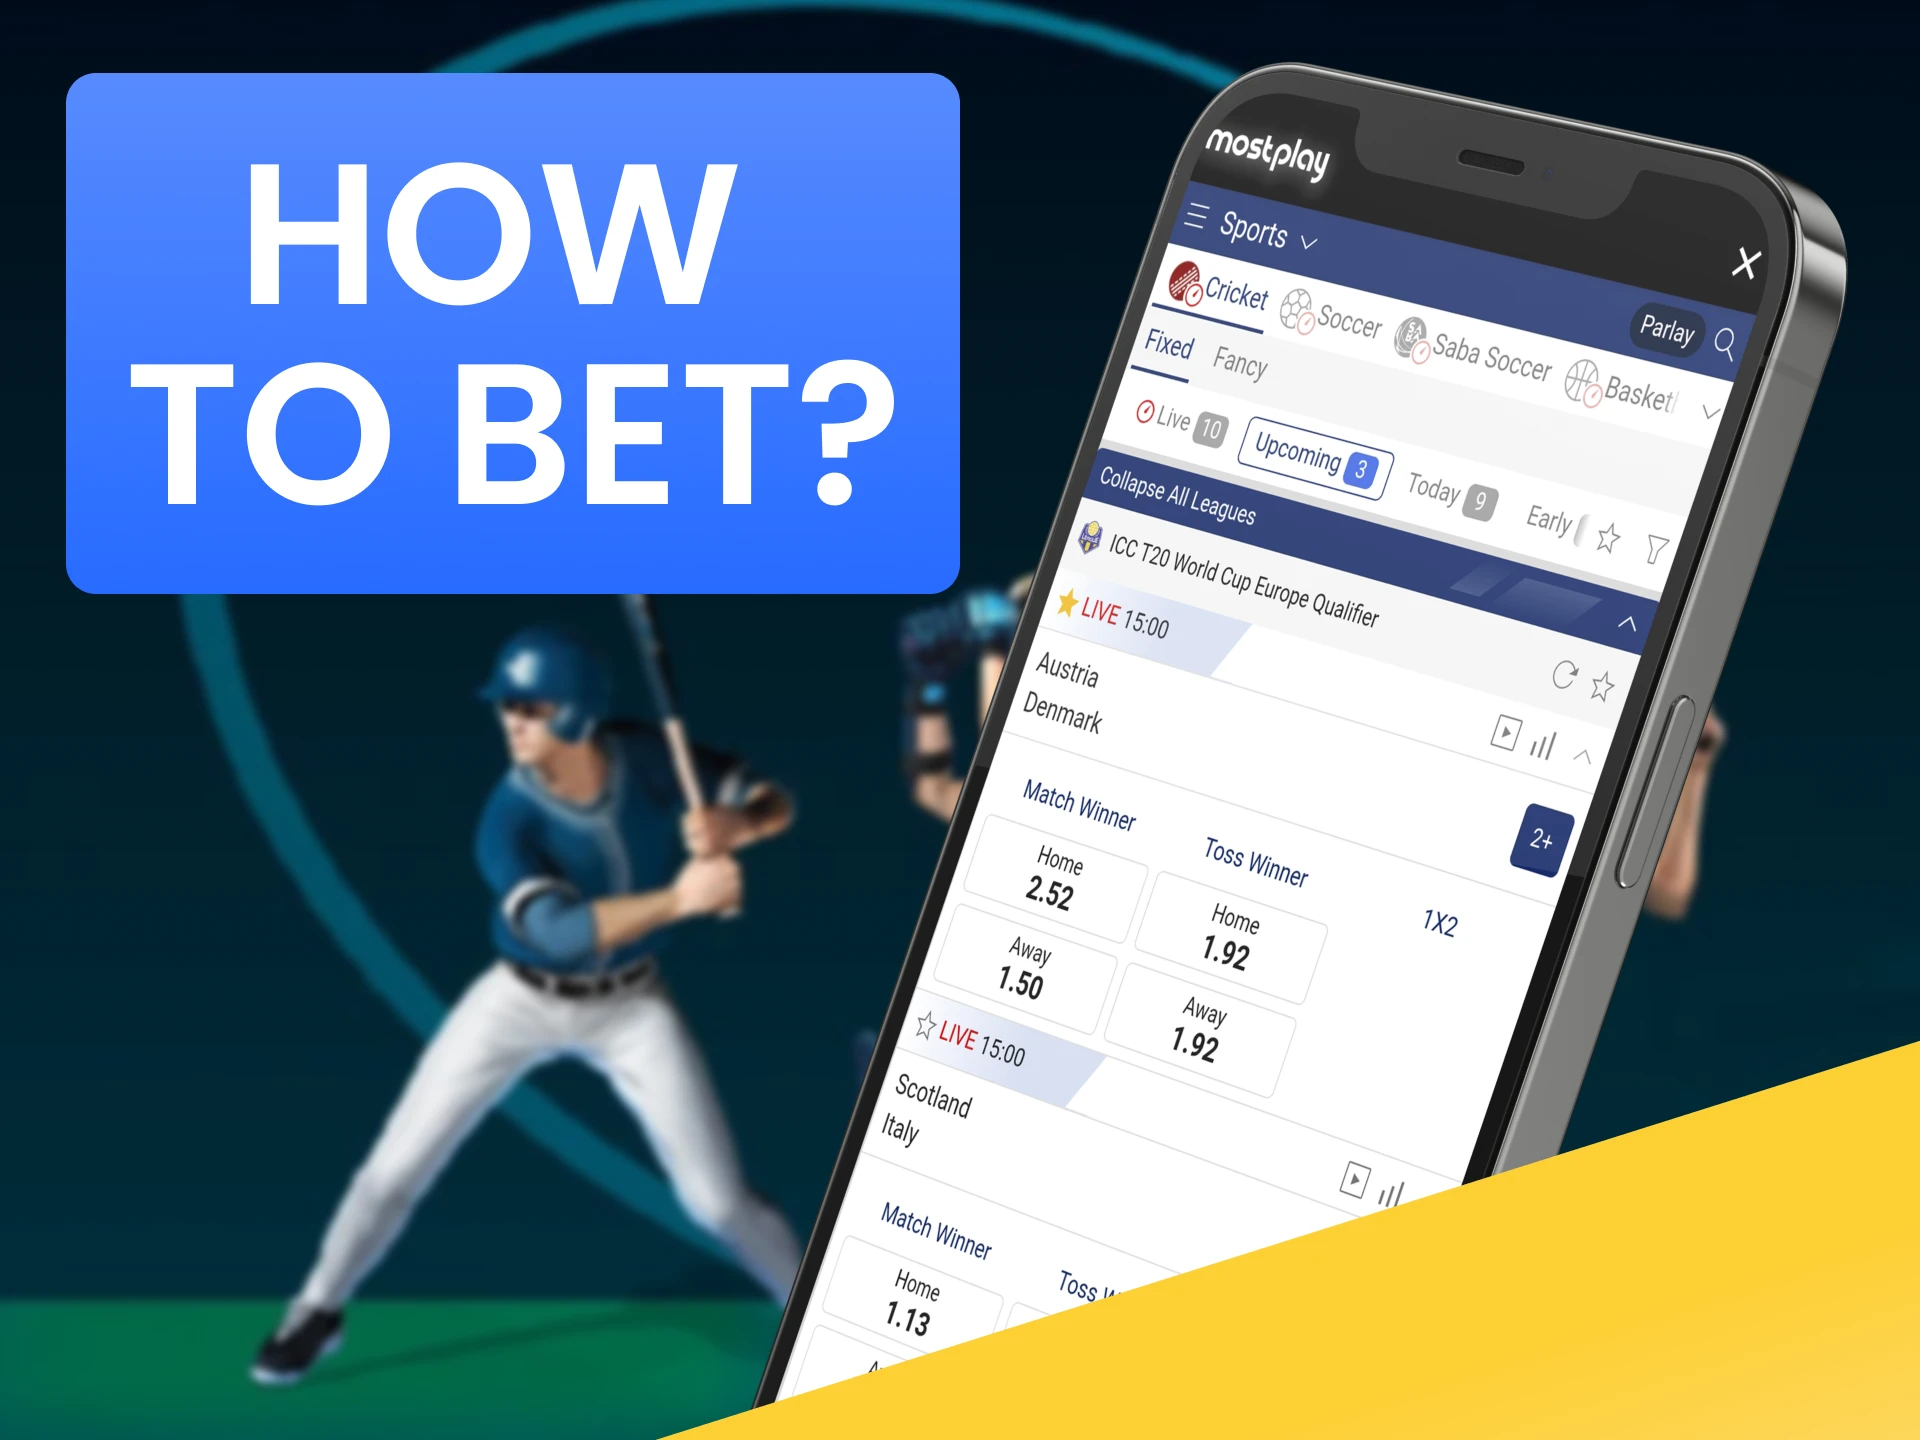 We will tell you how to bet on virtual sports on Mostplay.